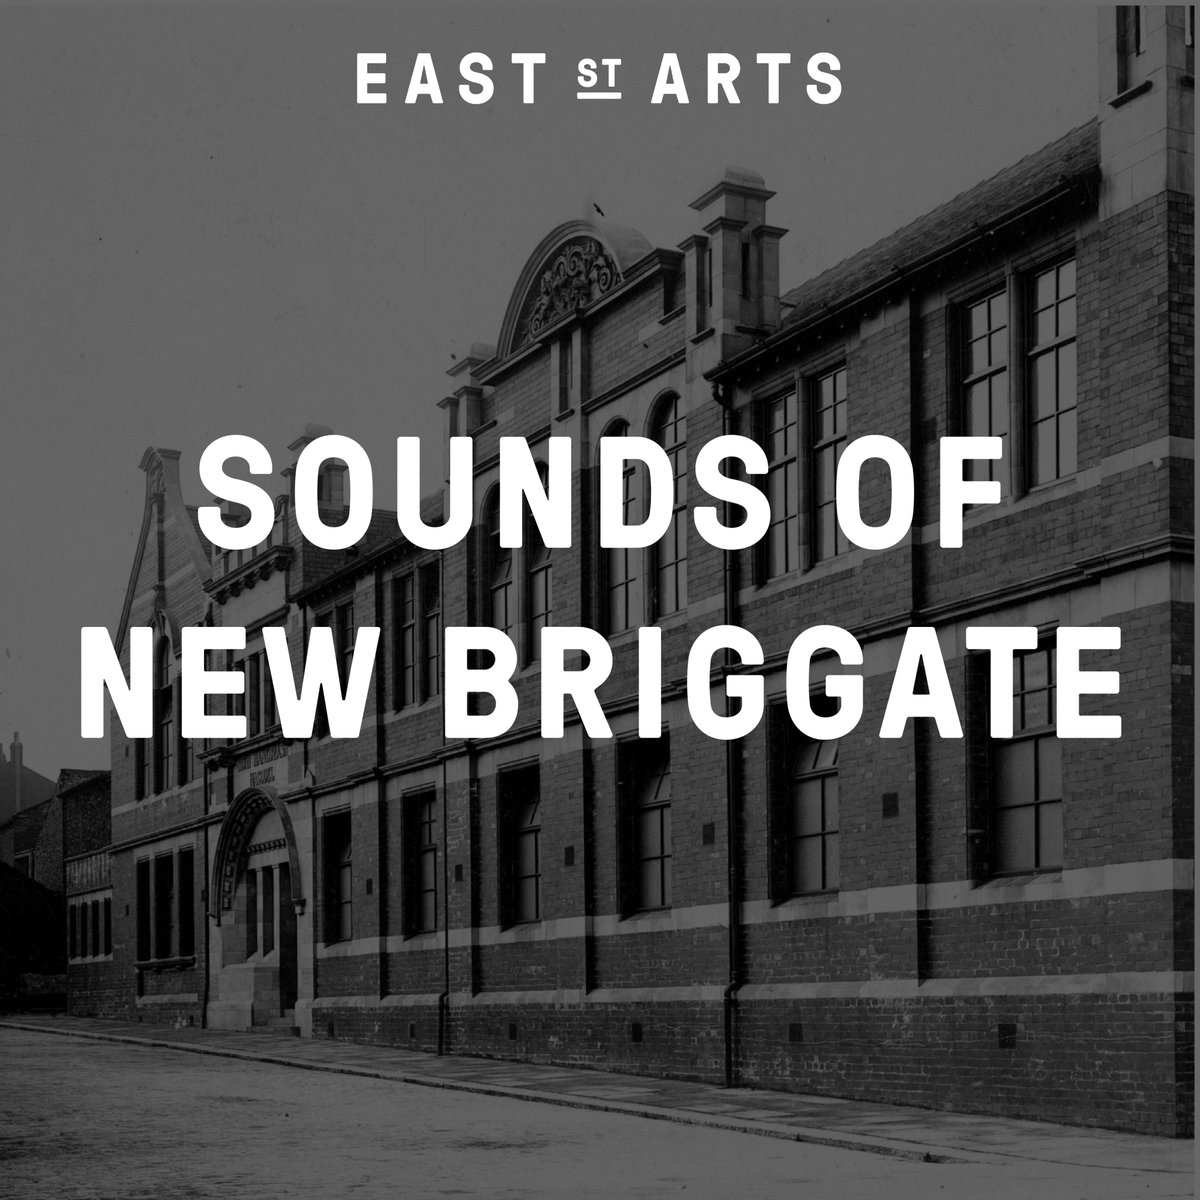 🎉 Join Simon Phillips, from the Leeds Jewish Housing Association for The Jewish Heritage of New Briggate and Beyond exploring how through the 1860s to the 1920s New Briggate was a hub of Jewish life. Listen here: eastst.art/sounds-of-new-…